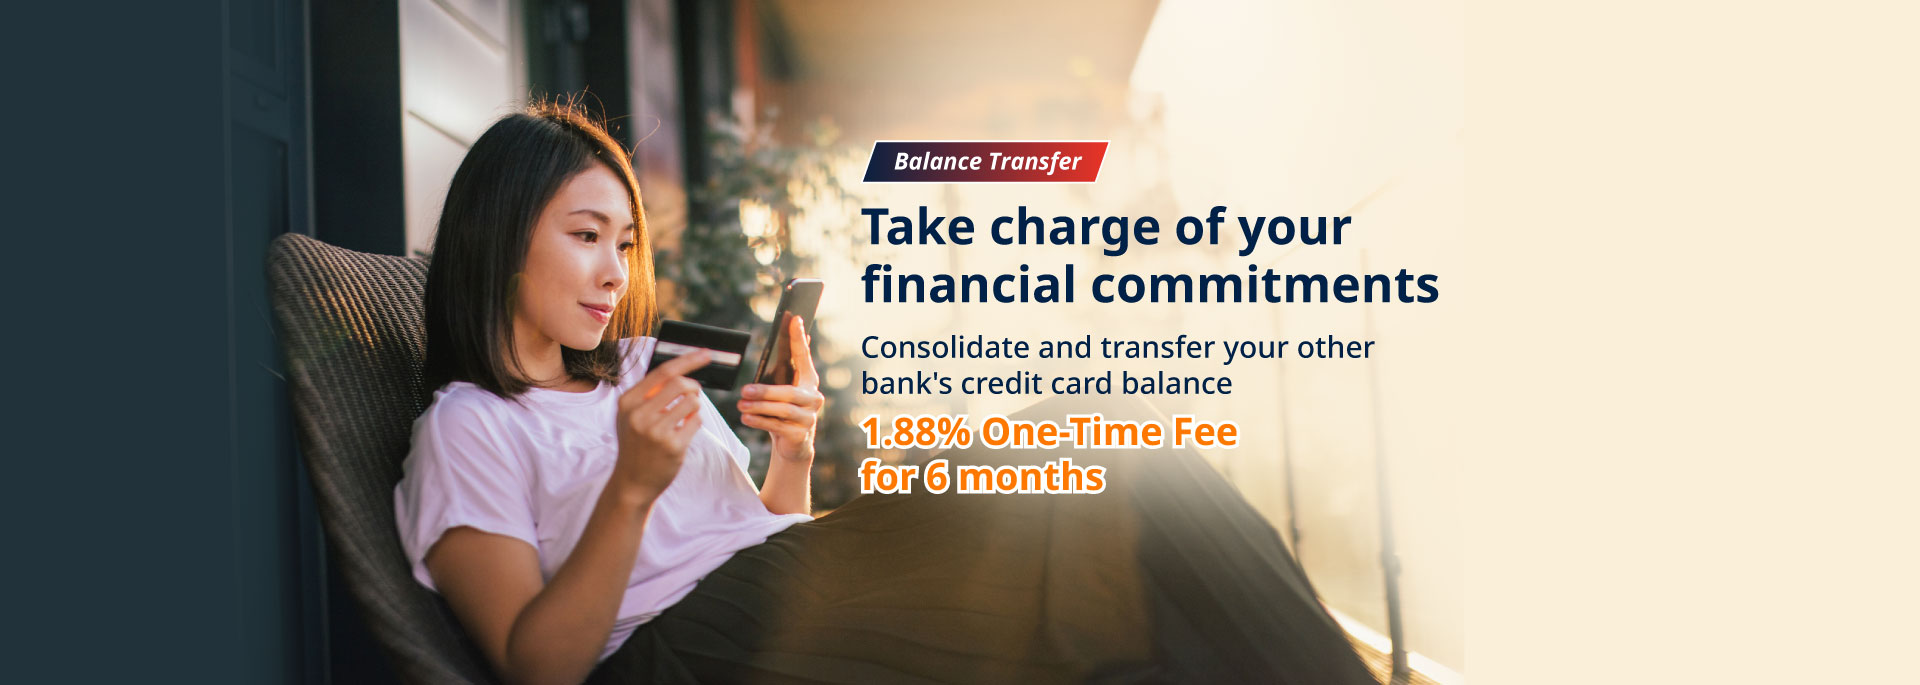 By Invitation Only: Exclusive 3.00% p.a. Interest Balance Transfer For You